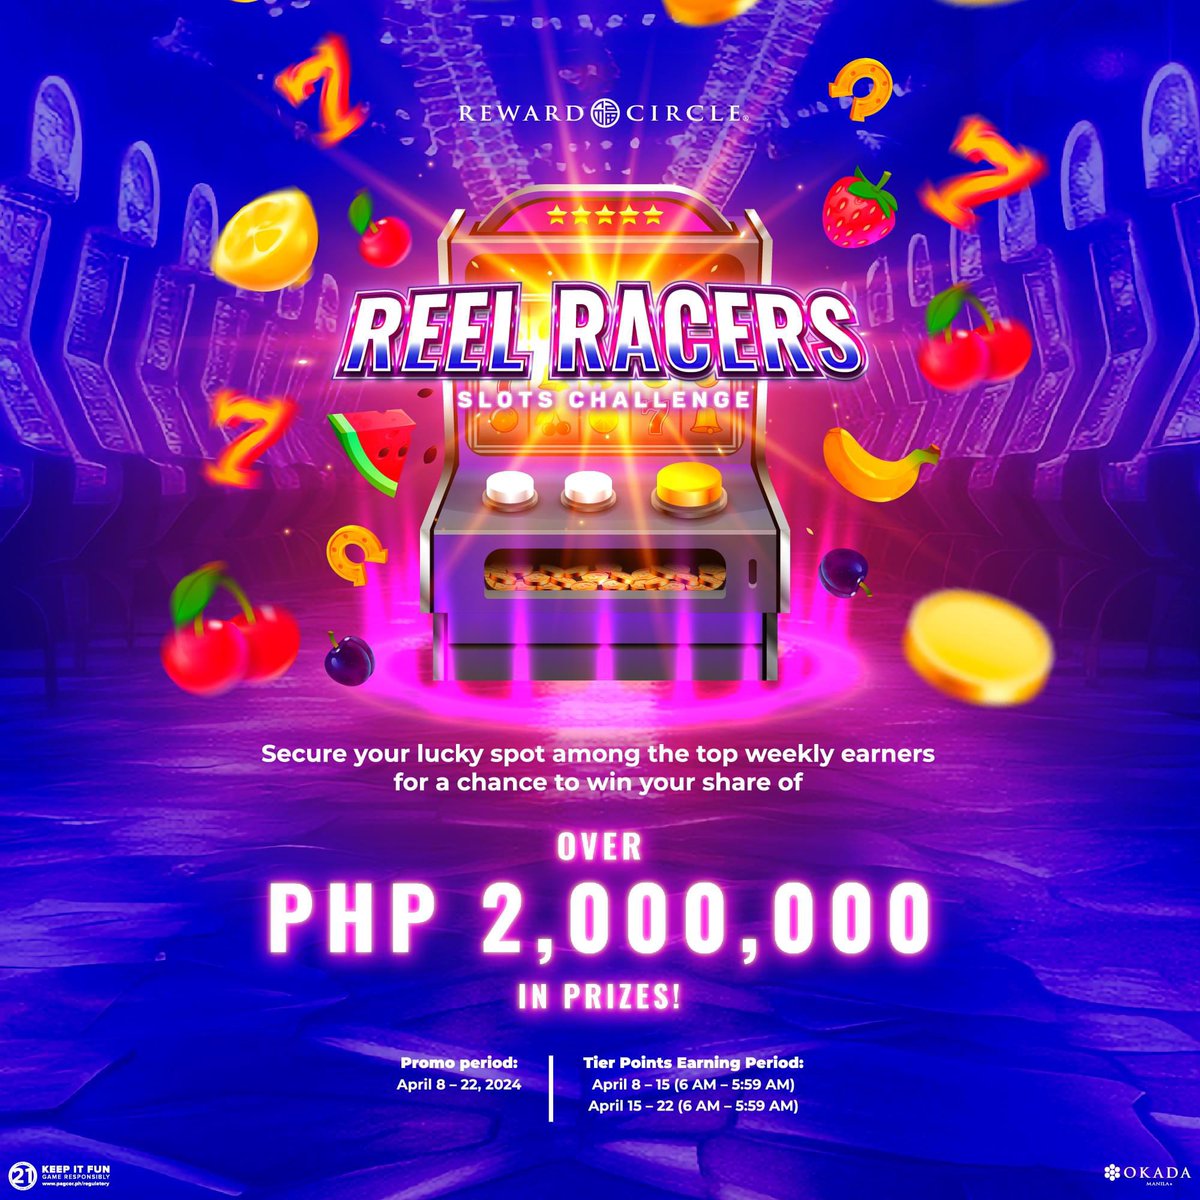 Congratulations to all the winners of Reel Racers: Slots Challenge who collectively won over PHP 2 million in prizes from April 8 to 22! Big thanks to everyone who joined the challenge! Keep an eye out for more exciting promos and offers coming your way.